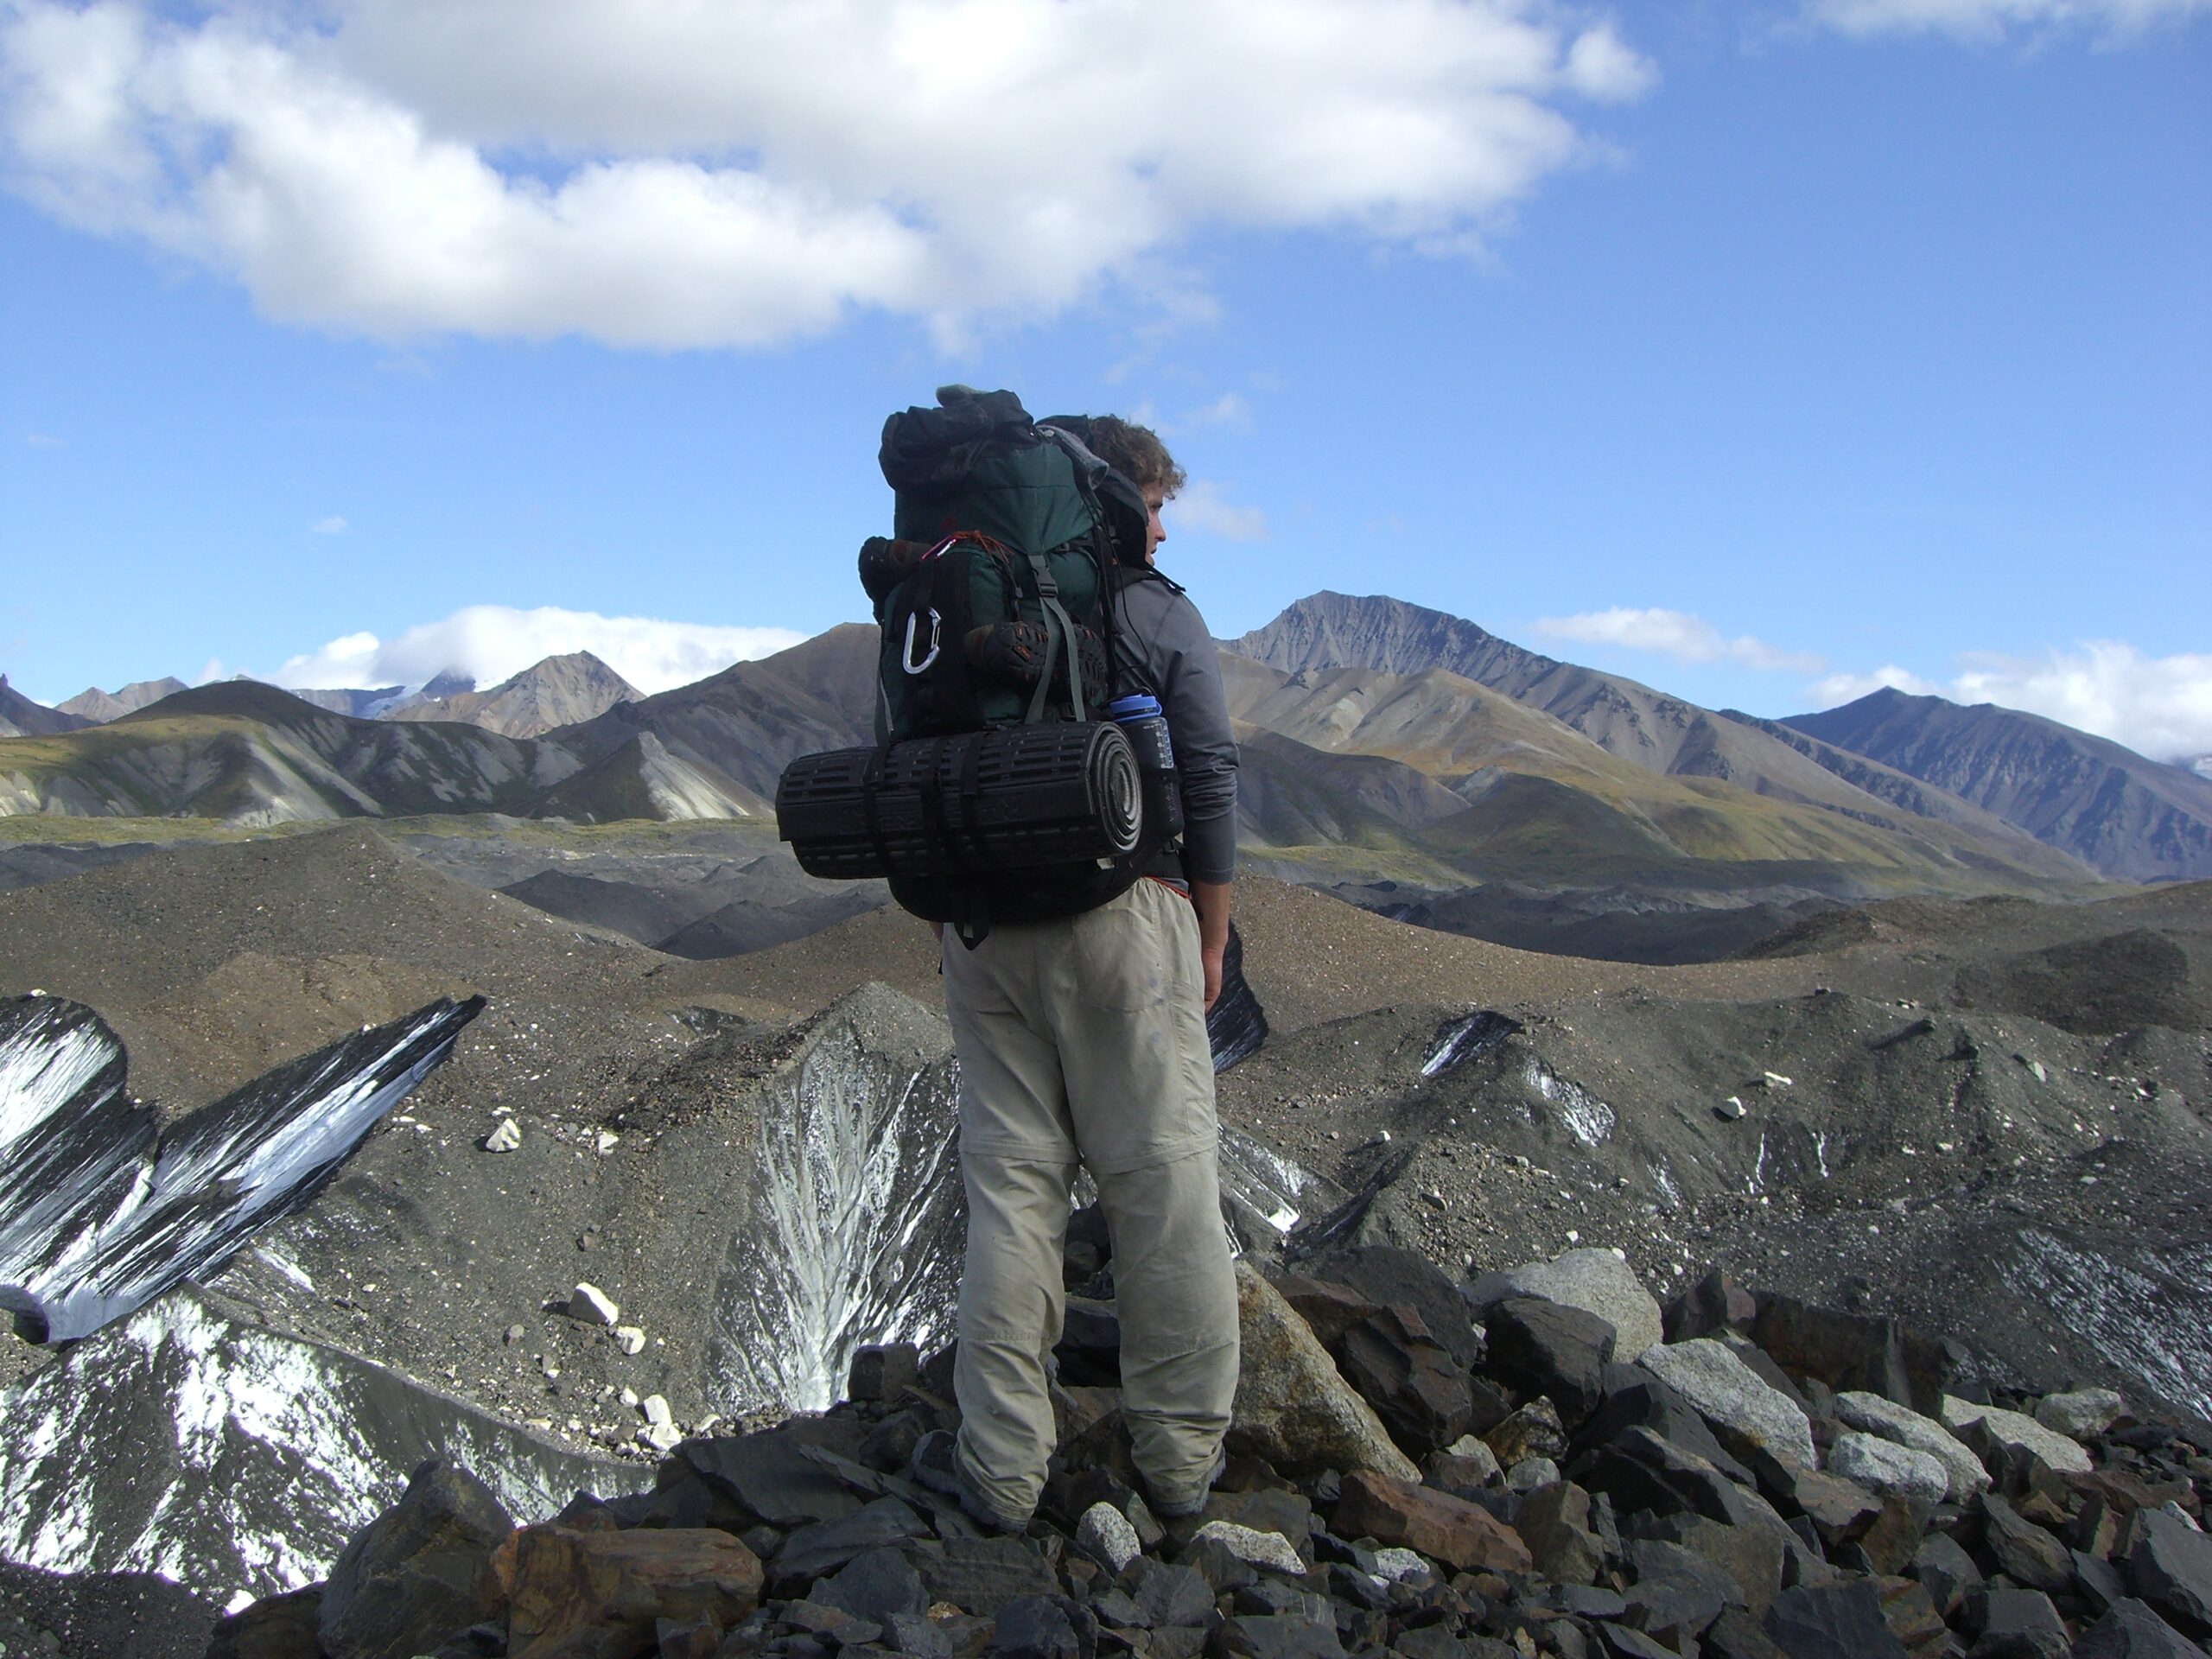 Brian looks across Muldrow Glacier from the top of one of its many peaks.